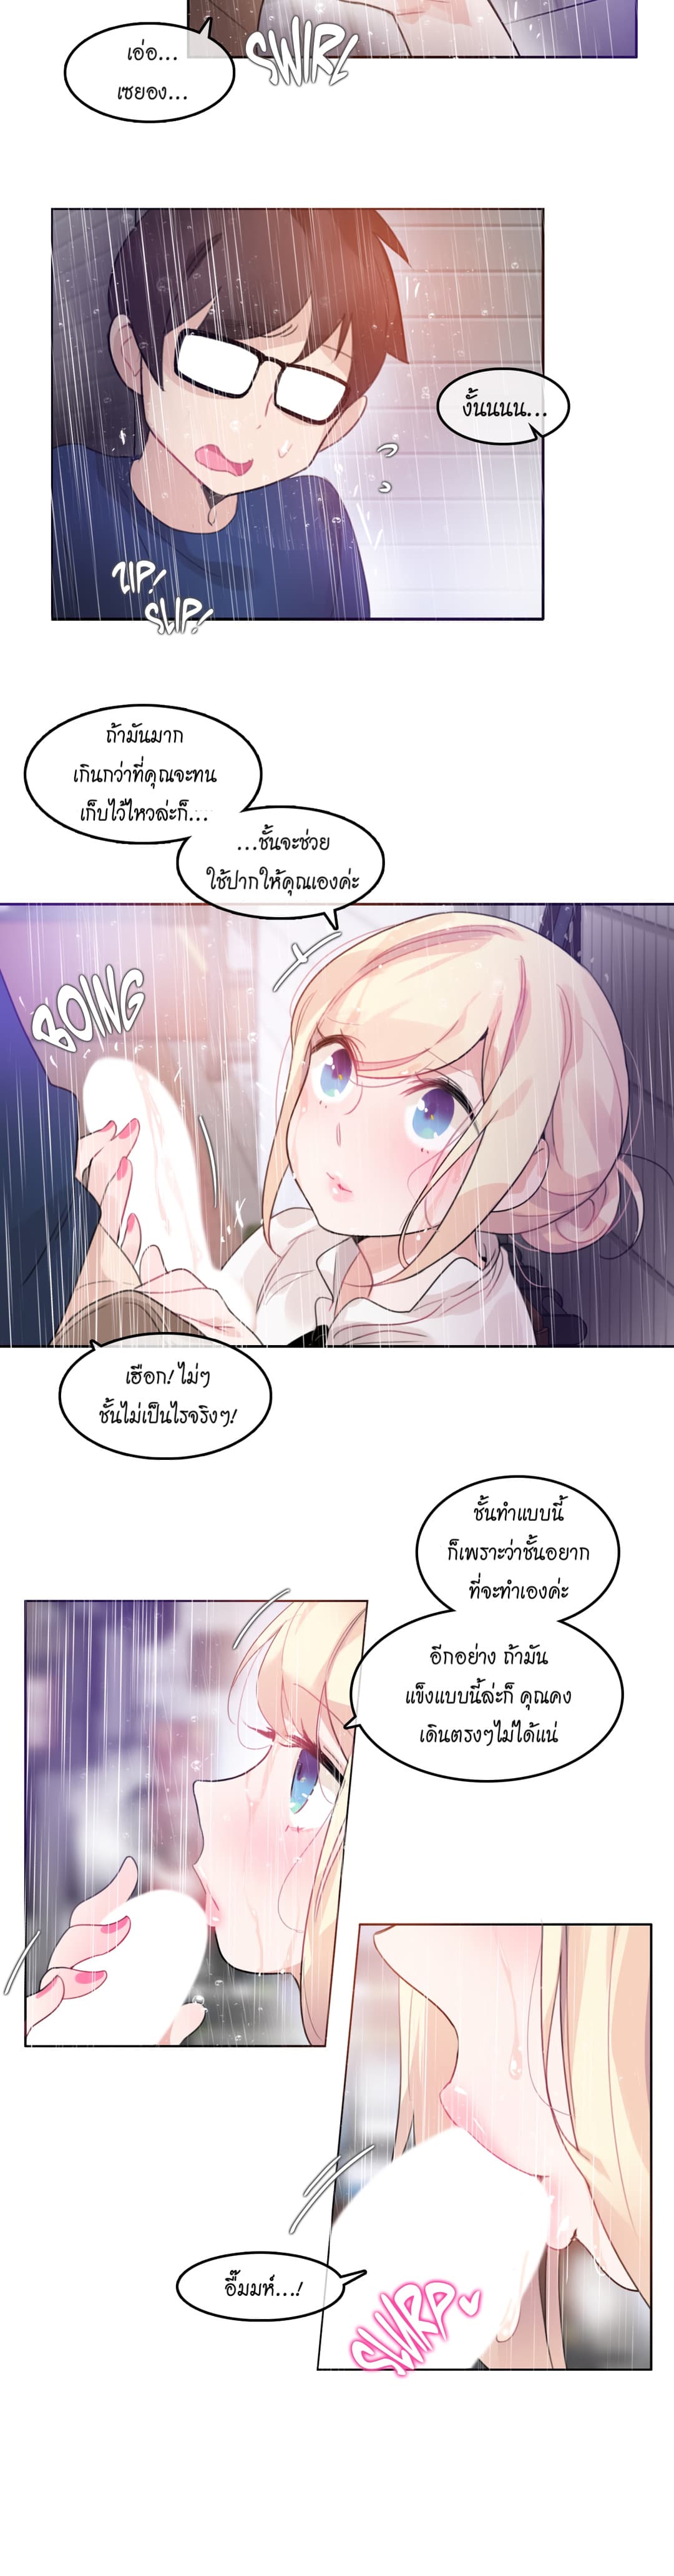 A Pervert’s Daily Life 36 (18)